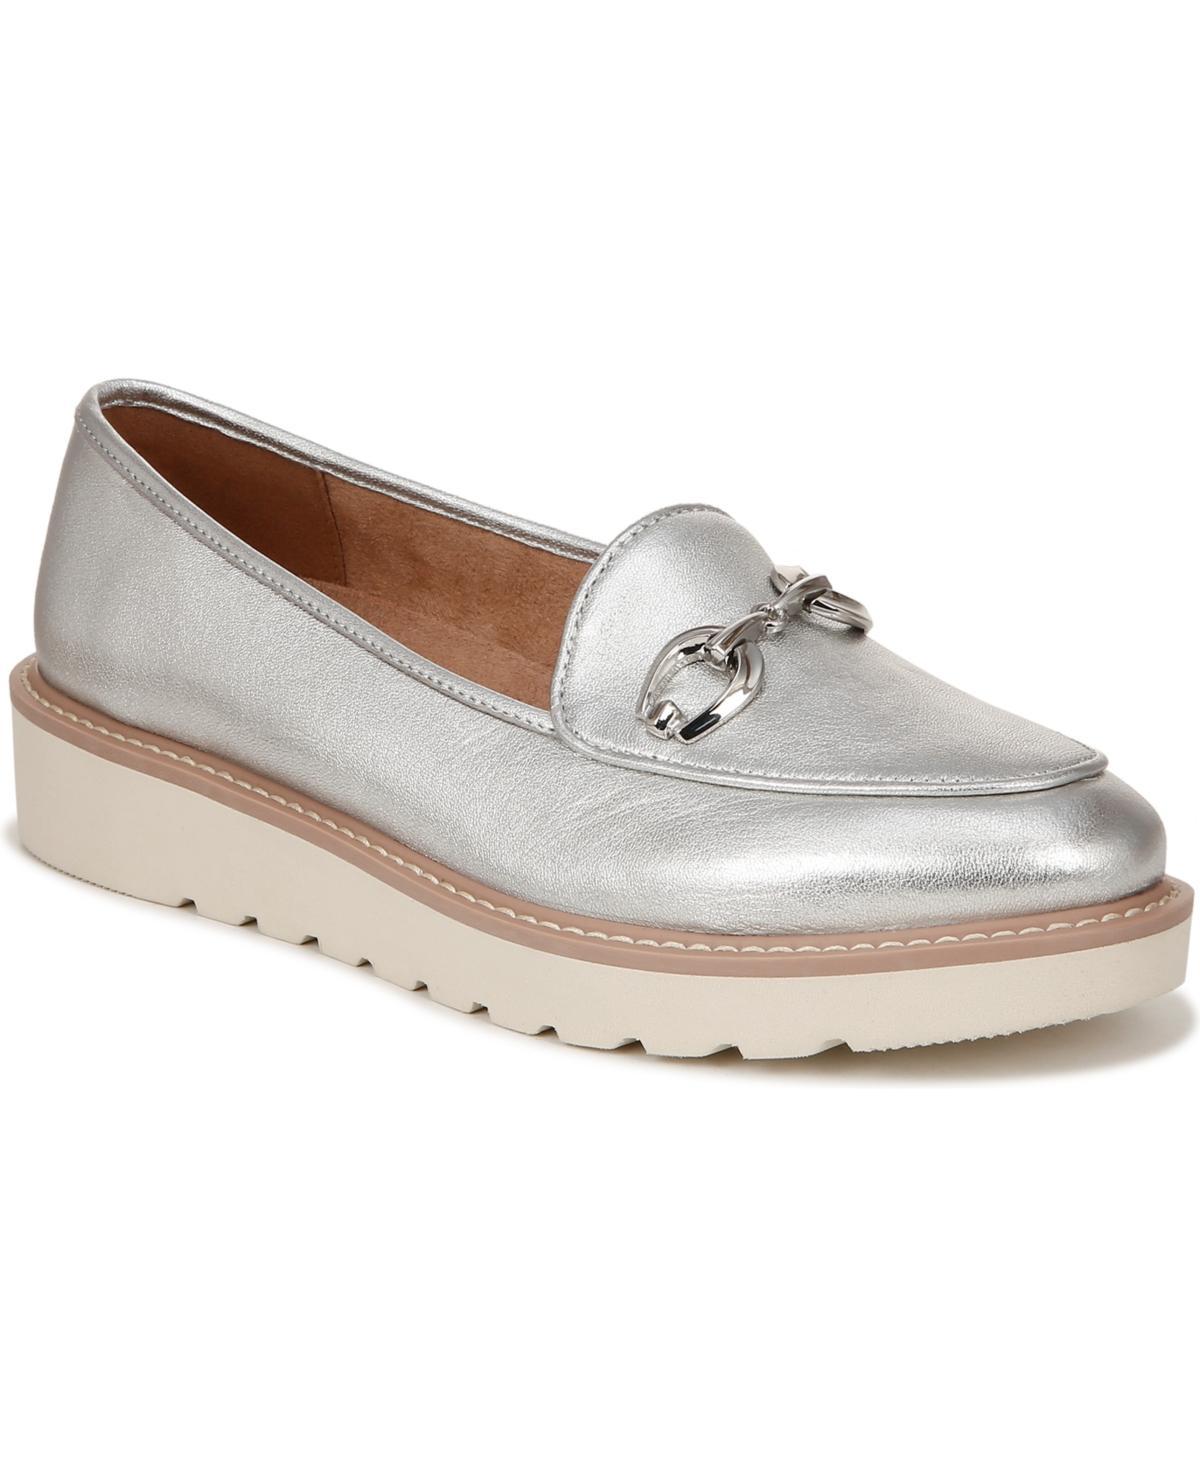 Naturalizer Adiline-Bit Leather Slip-On Lightweight Wedge Loafers Product Image